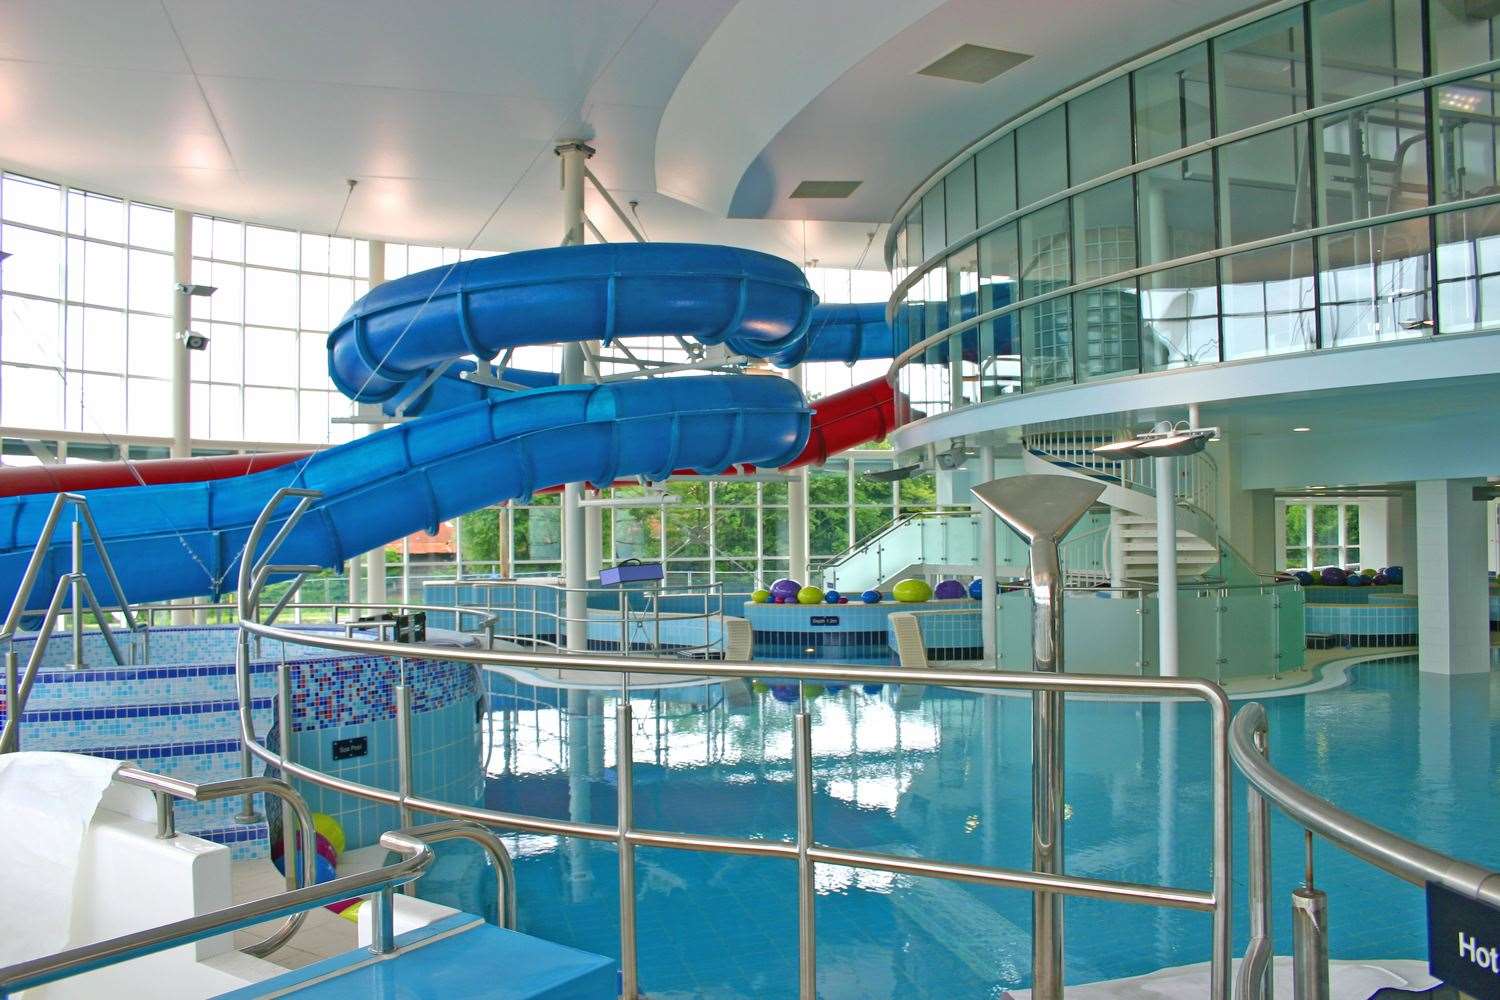 New pool features aimed at younger children will be added to the existing pool area if approved